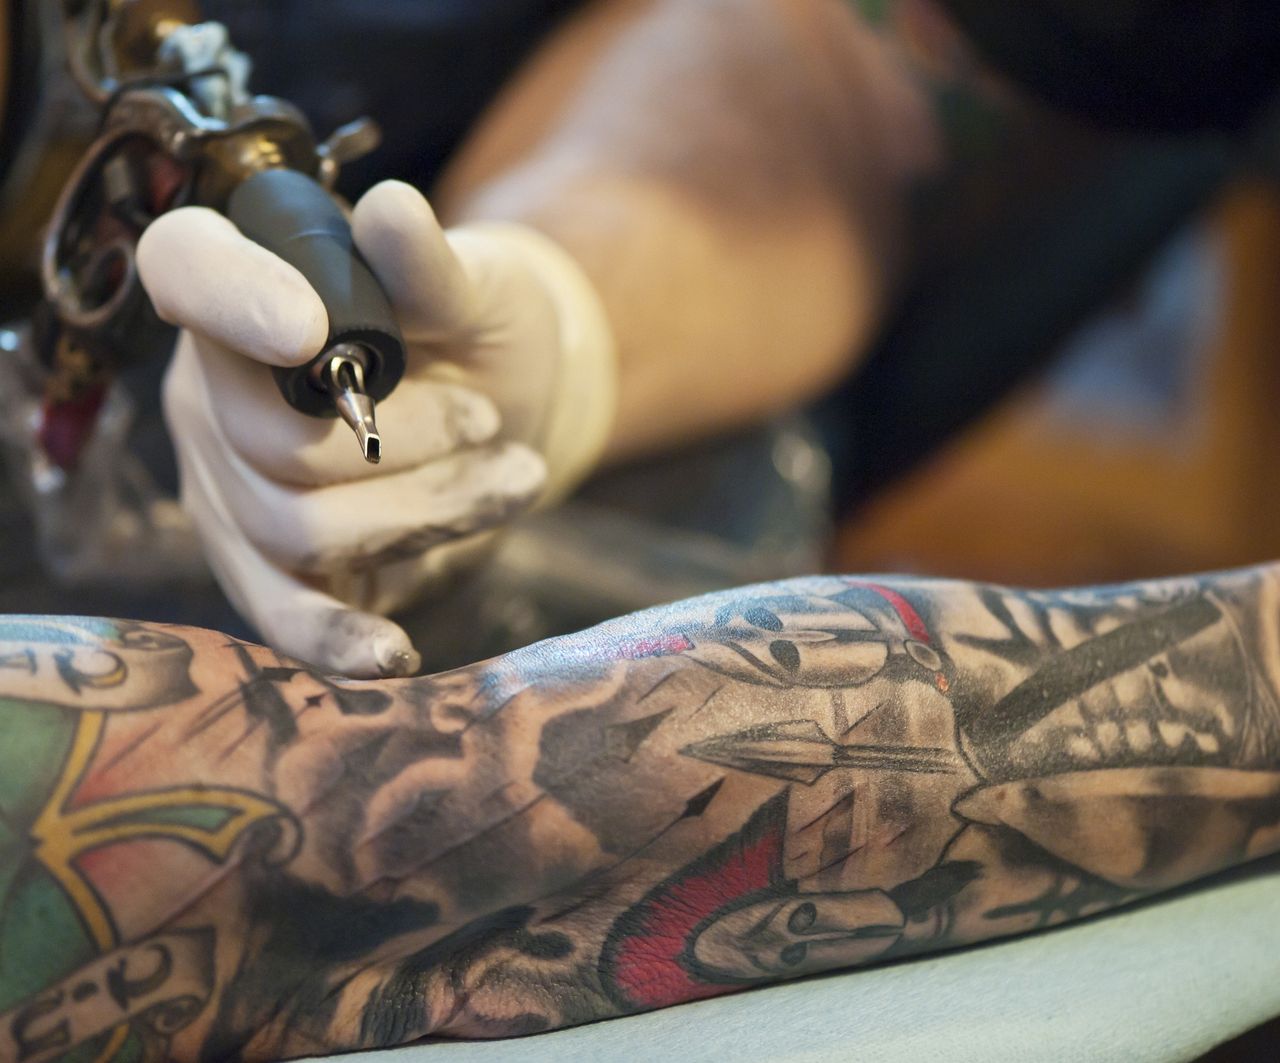 Tattoo ink dangers: FDA finds bacteria in unopened containers